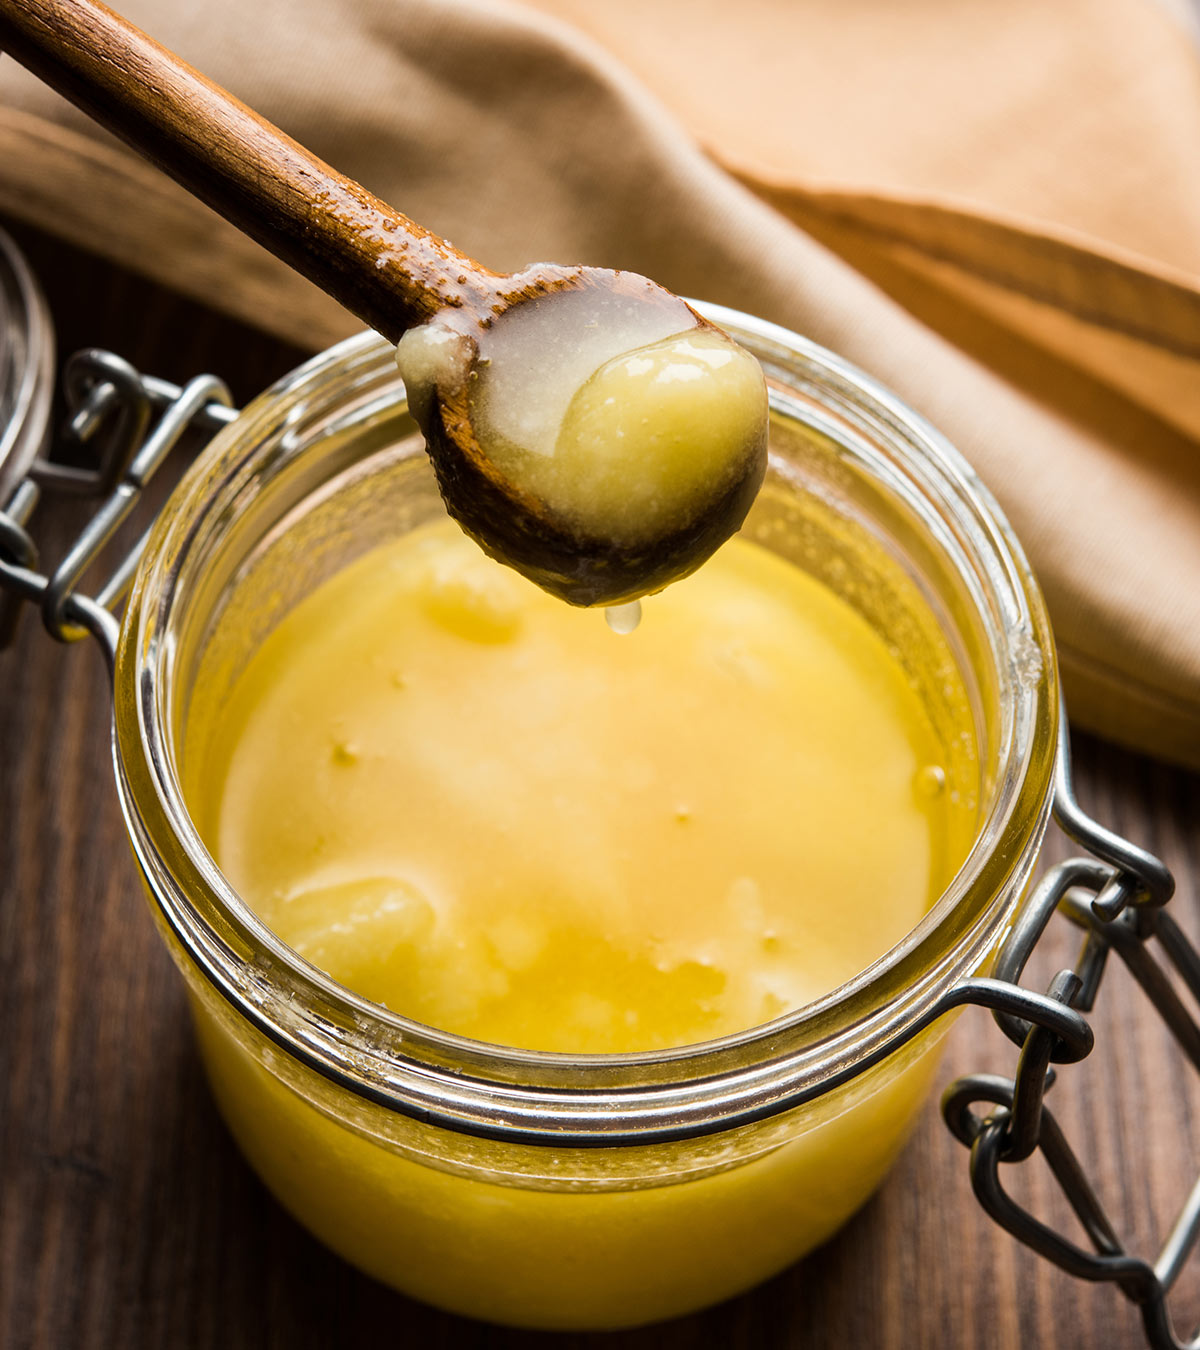 Ghee During Pregnancy: Does It Help In Having A Normal Delivery?